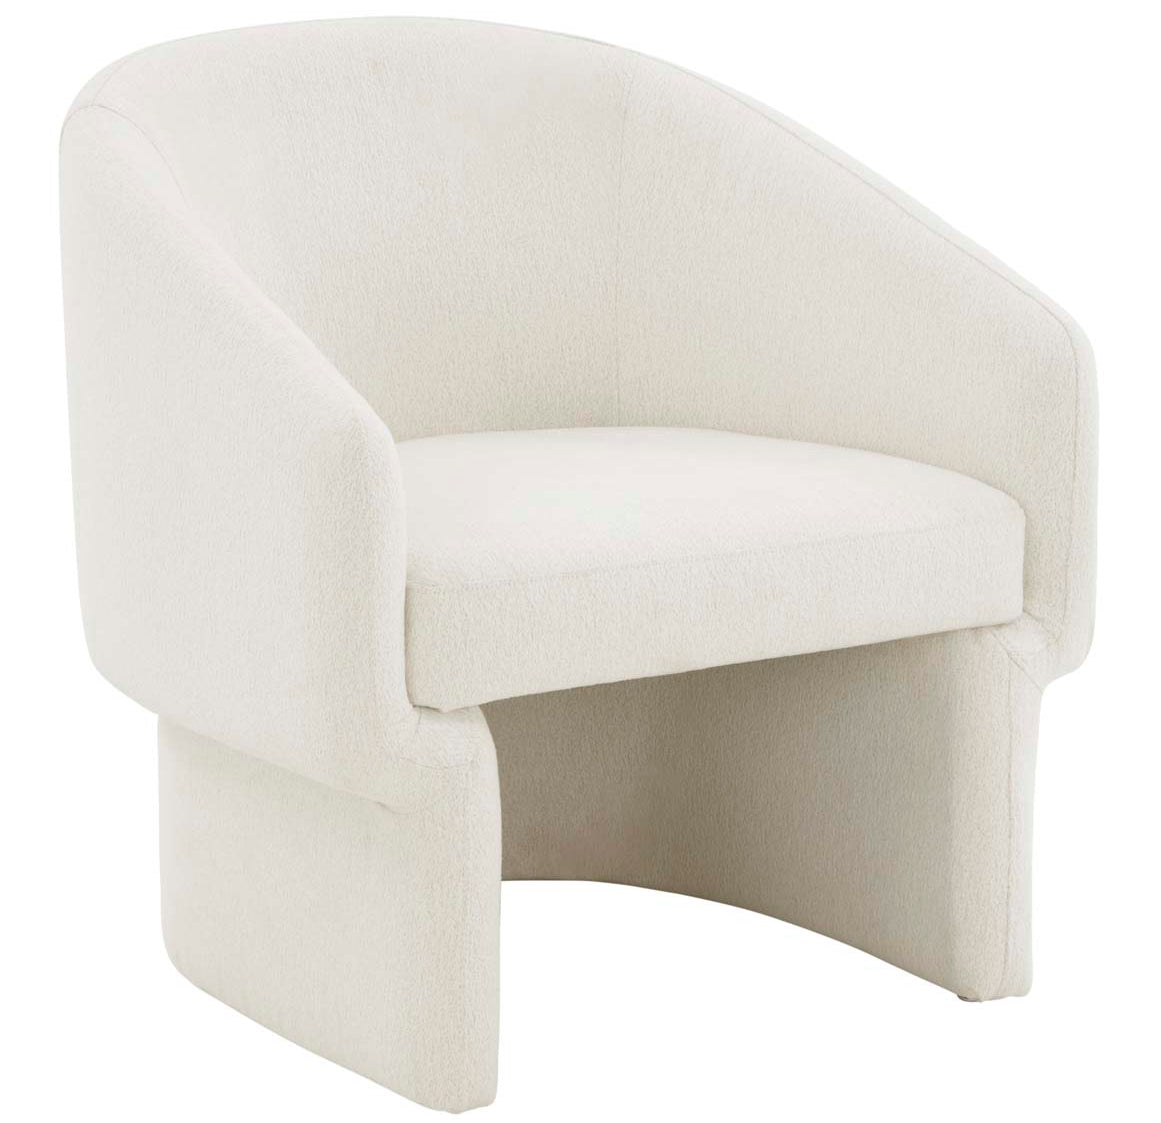 Safavieh Couture Susie Barrel Back Accent Chair